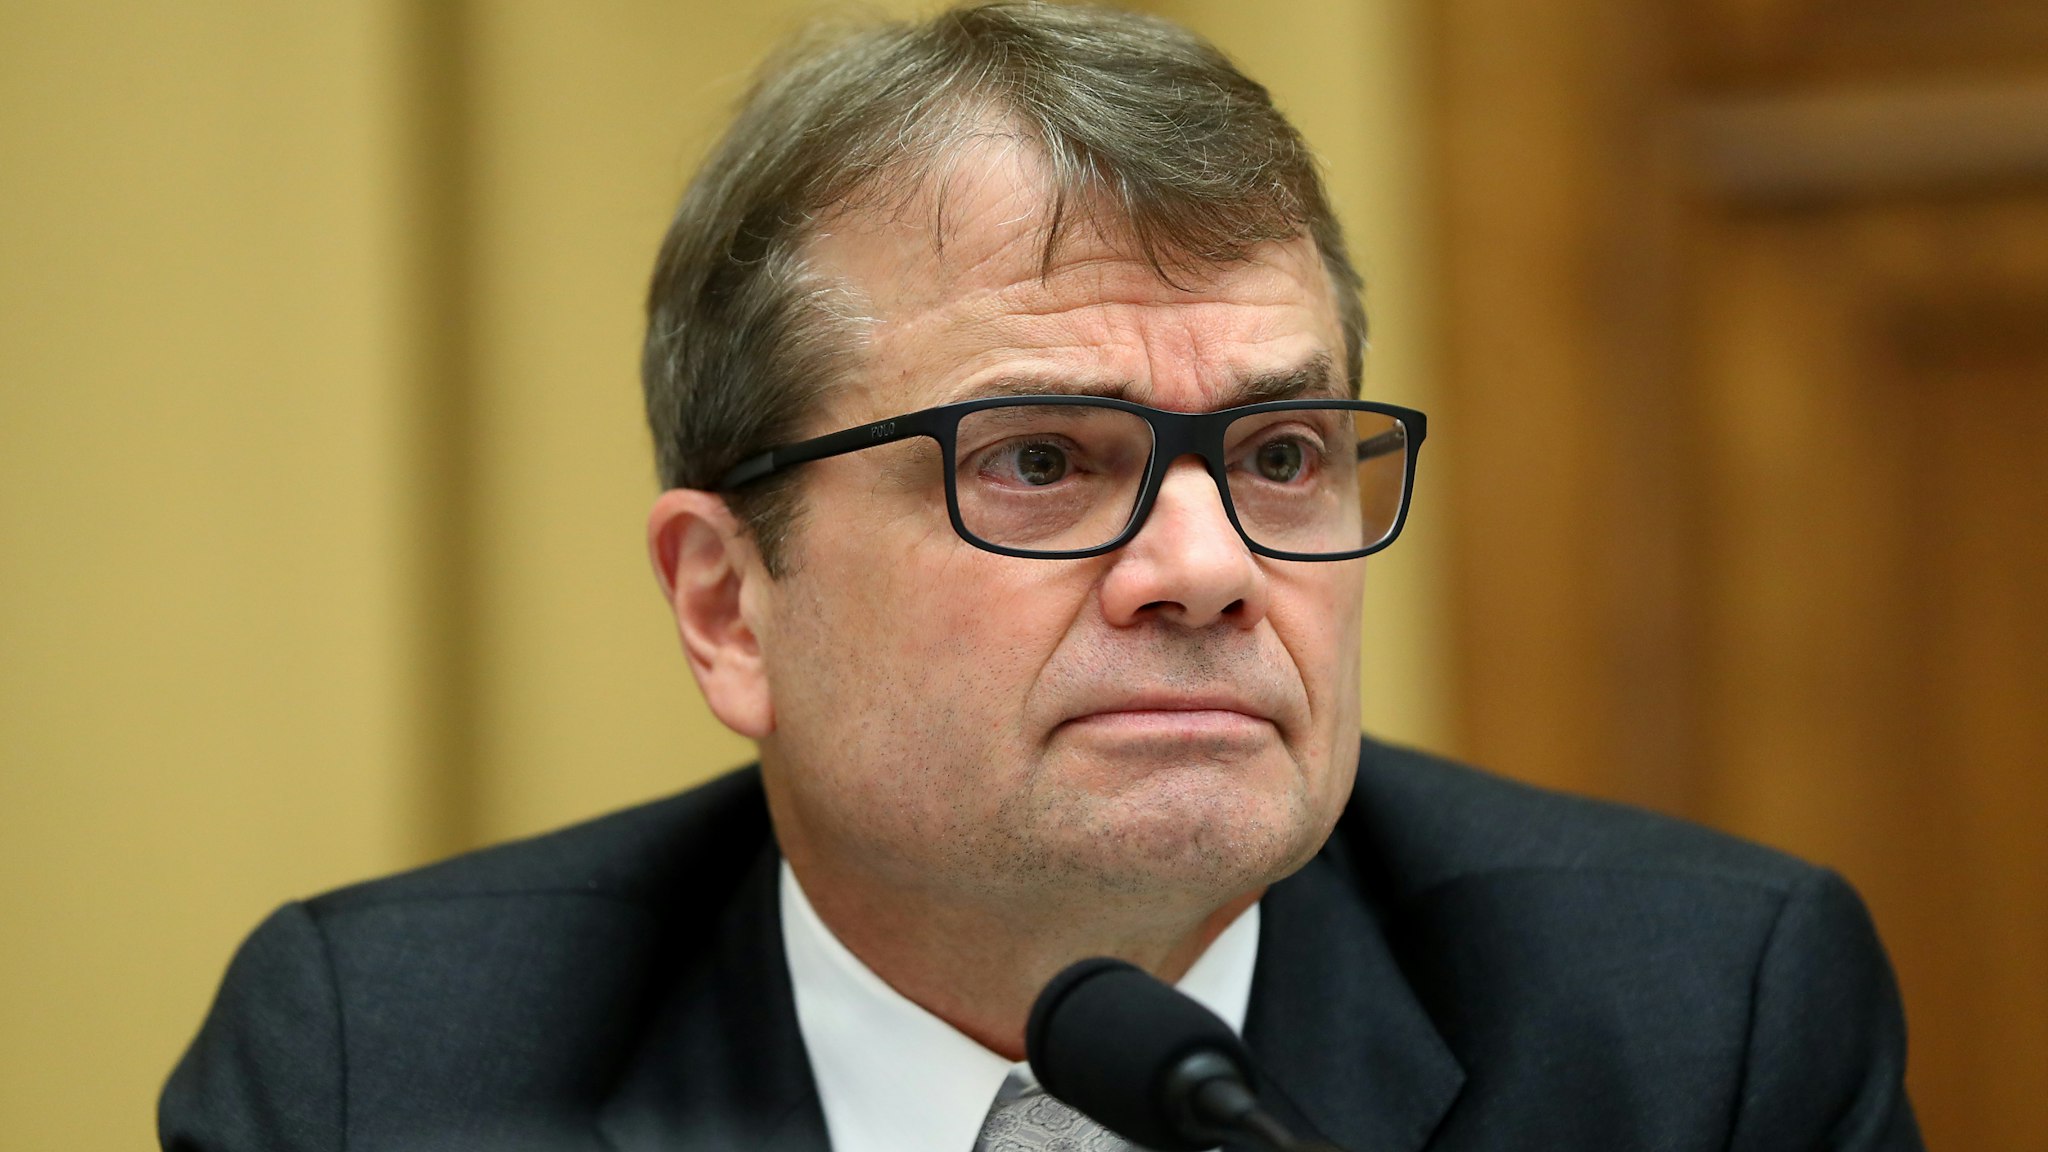 Representative Mike Quigley, a Democrat from Illinois, listens during a House Intelligence Committee hearing with Robert Mueller, former special counsel for the U.S. Department of Justice, in Washington, D.C., U.S., on Wednesday, July 24, 2019. Mueller made his reluctant, long-awaited appearance before Congress Wednesday, resisting pressure from Democrats who hoped he'd reveal additional information about his investigation of President Donald Trump.